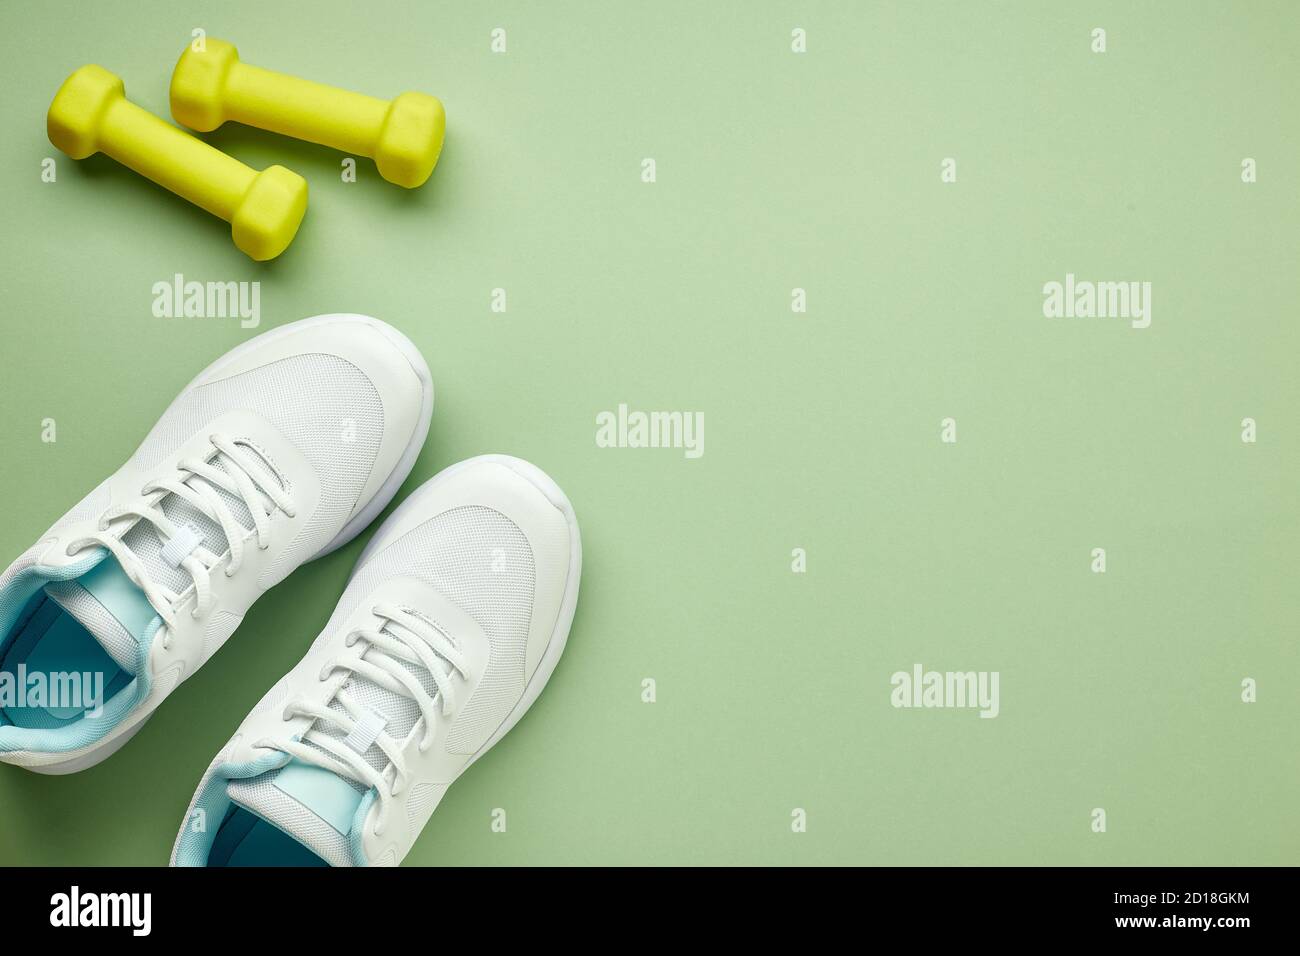 Creative flat lay of sport and fitness equipments. Women's white sneakers and green dumbbells on a light green background. Stock Photo